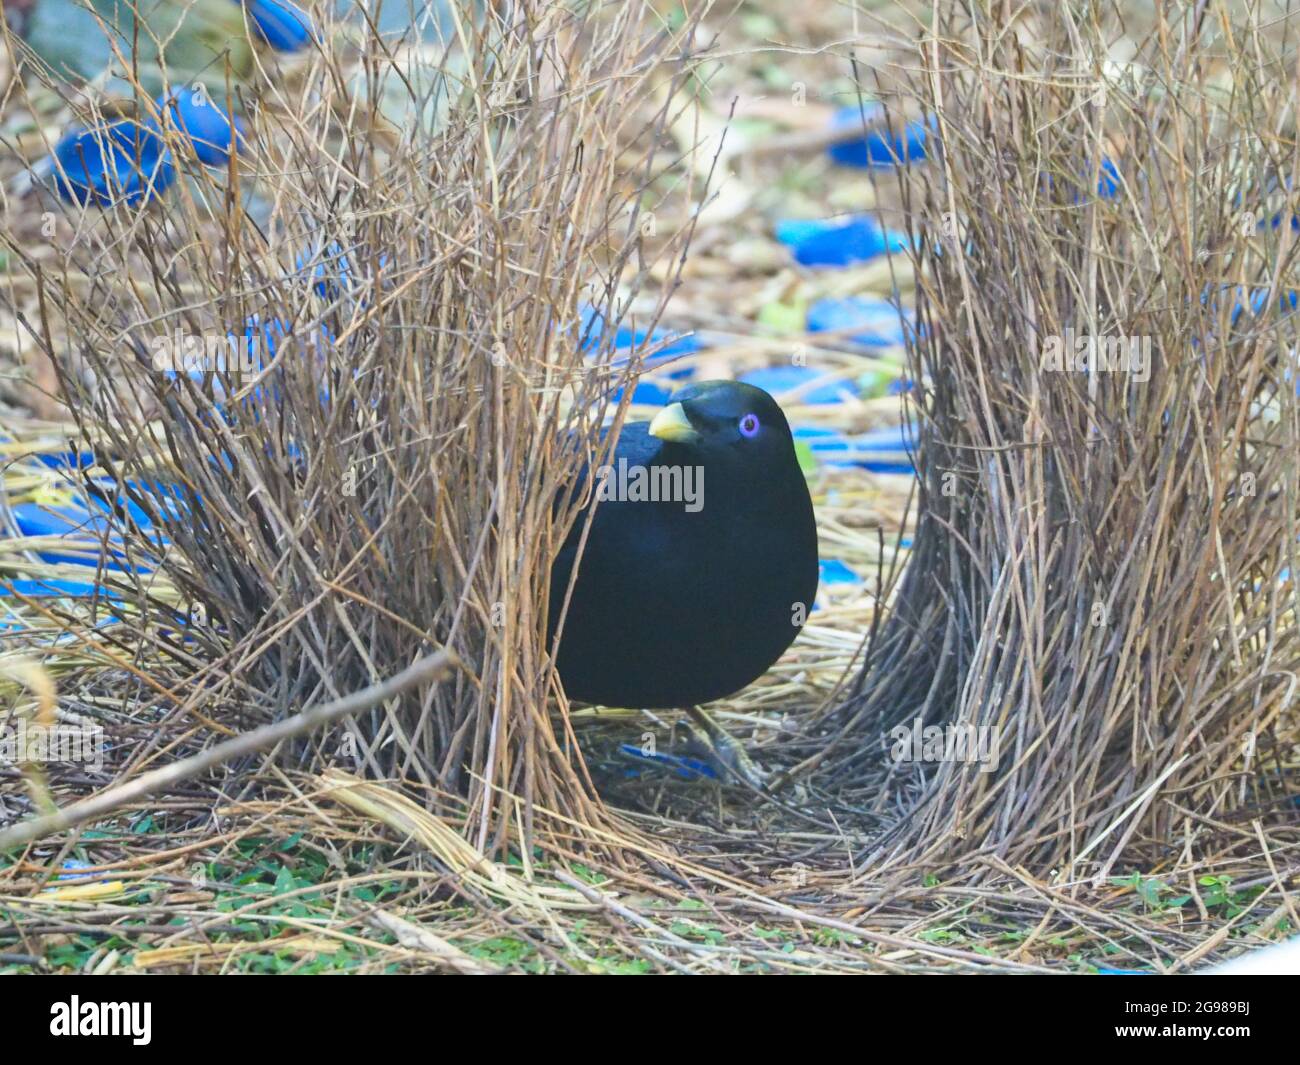 Bird.Satin Bowerbird with his Bower, 2 parallel walls of sticks decorated with collection of blue objects or treasures to impress prospective females Stock Photo